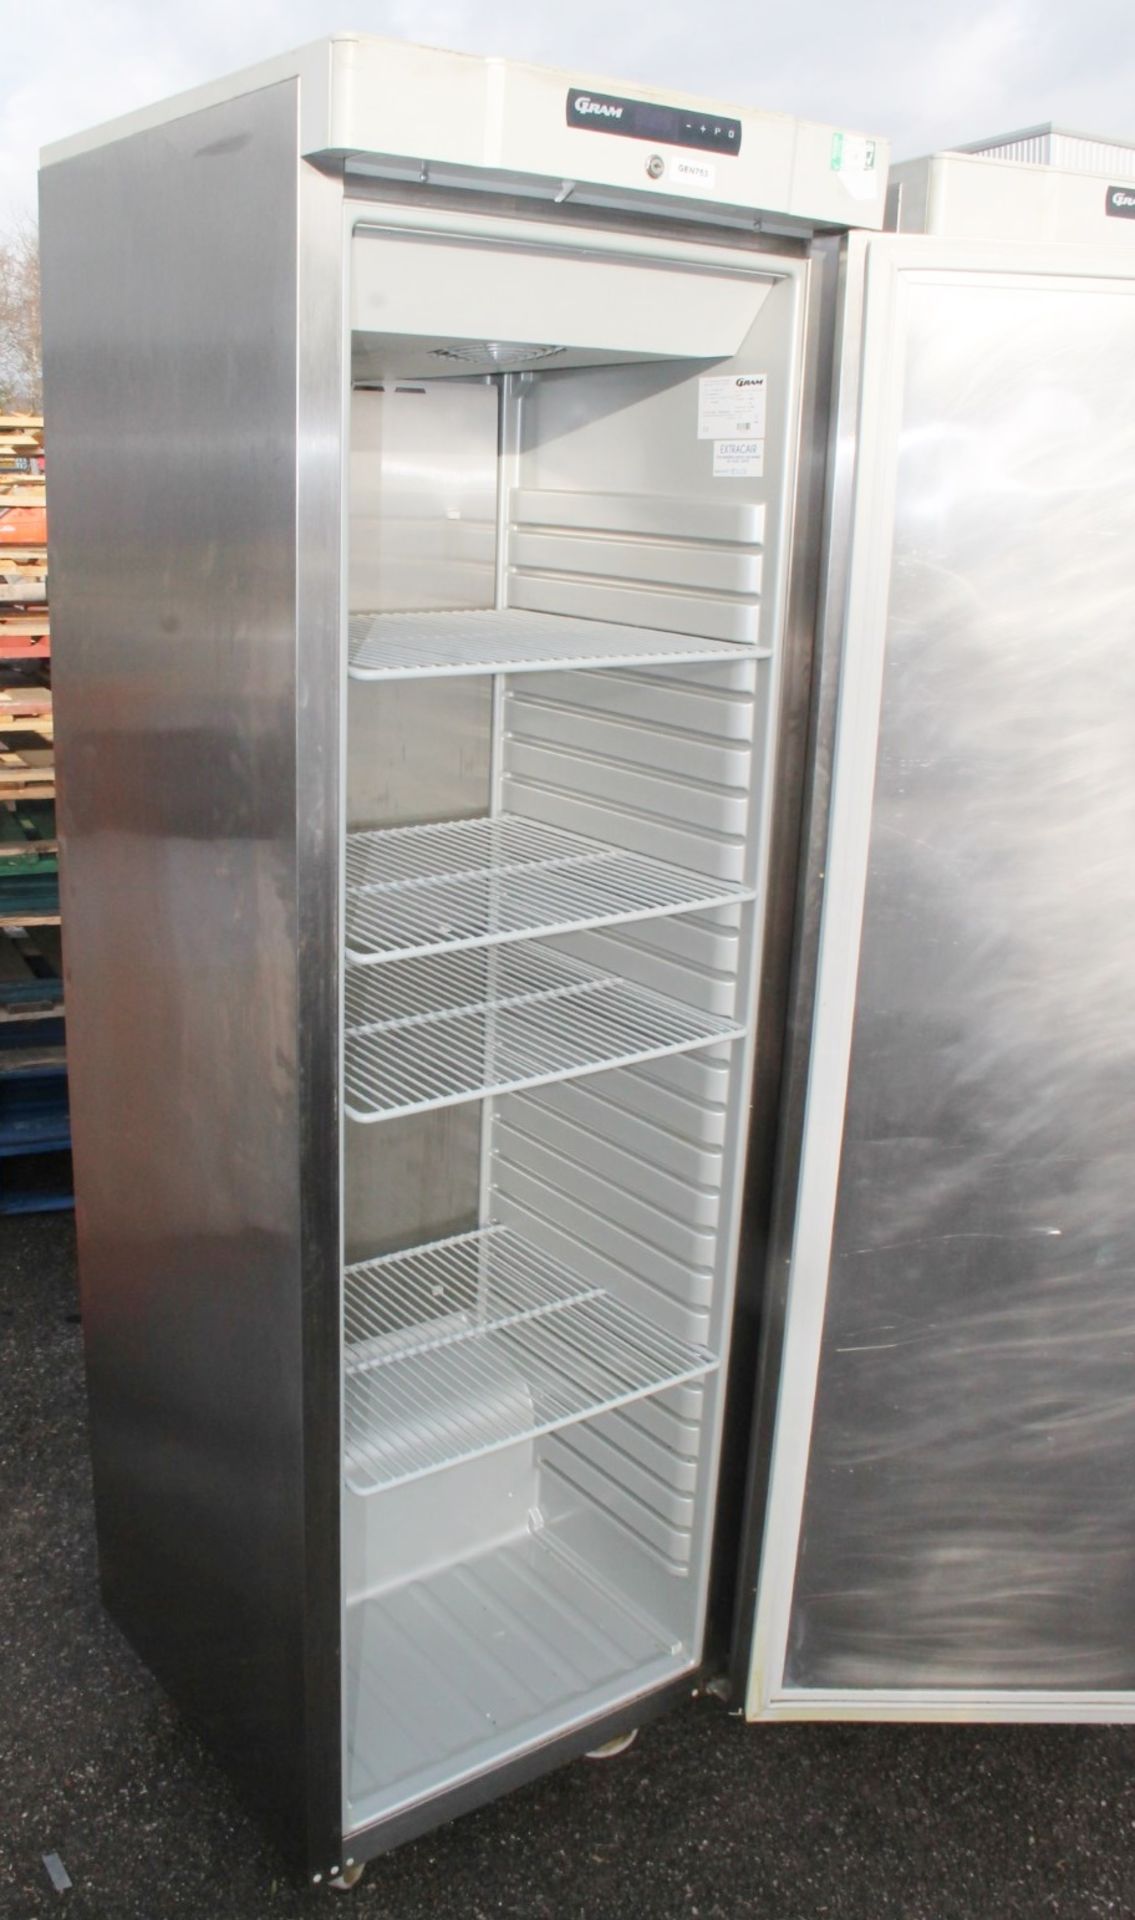 1 x GRAM Stainless Steel Commercial Upright Freezer - Ref: GEN753 WH2 - CL811 BEL - Location: - Image 4 of 6